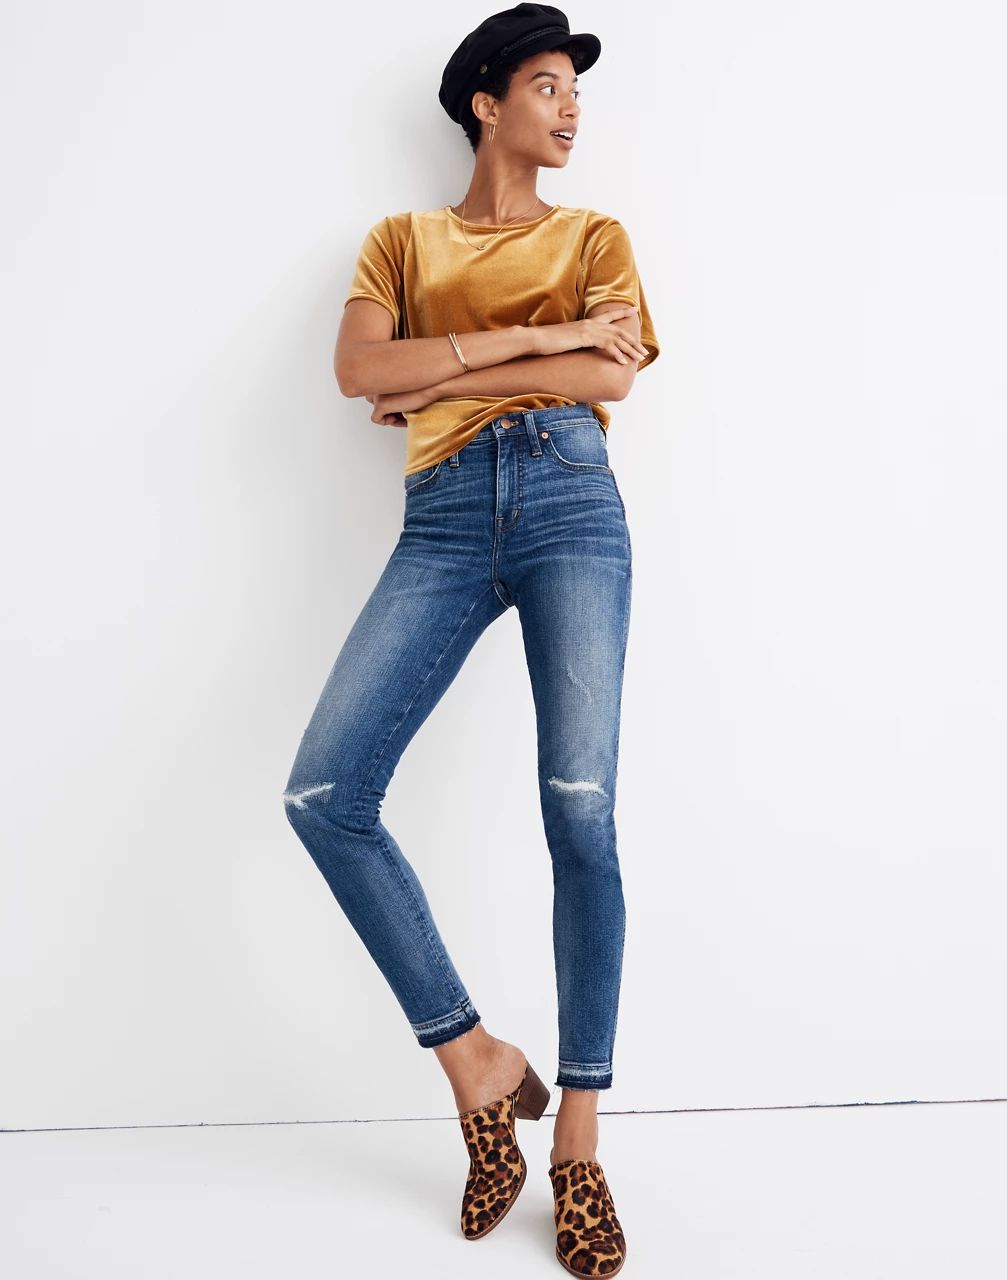 9" High-Rise Skinny Jeans in York Wash: Rip and Repair Edition | Madewell